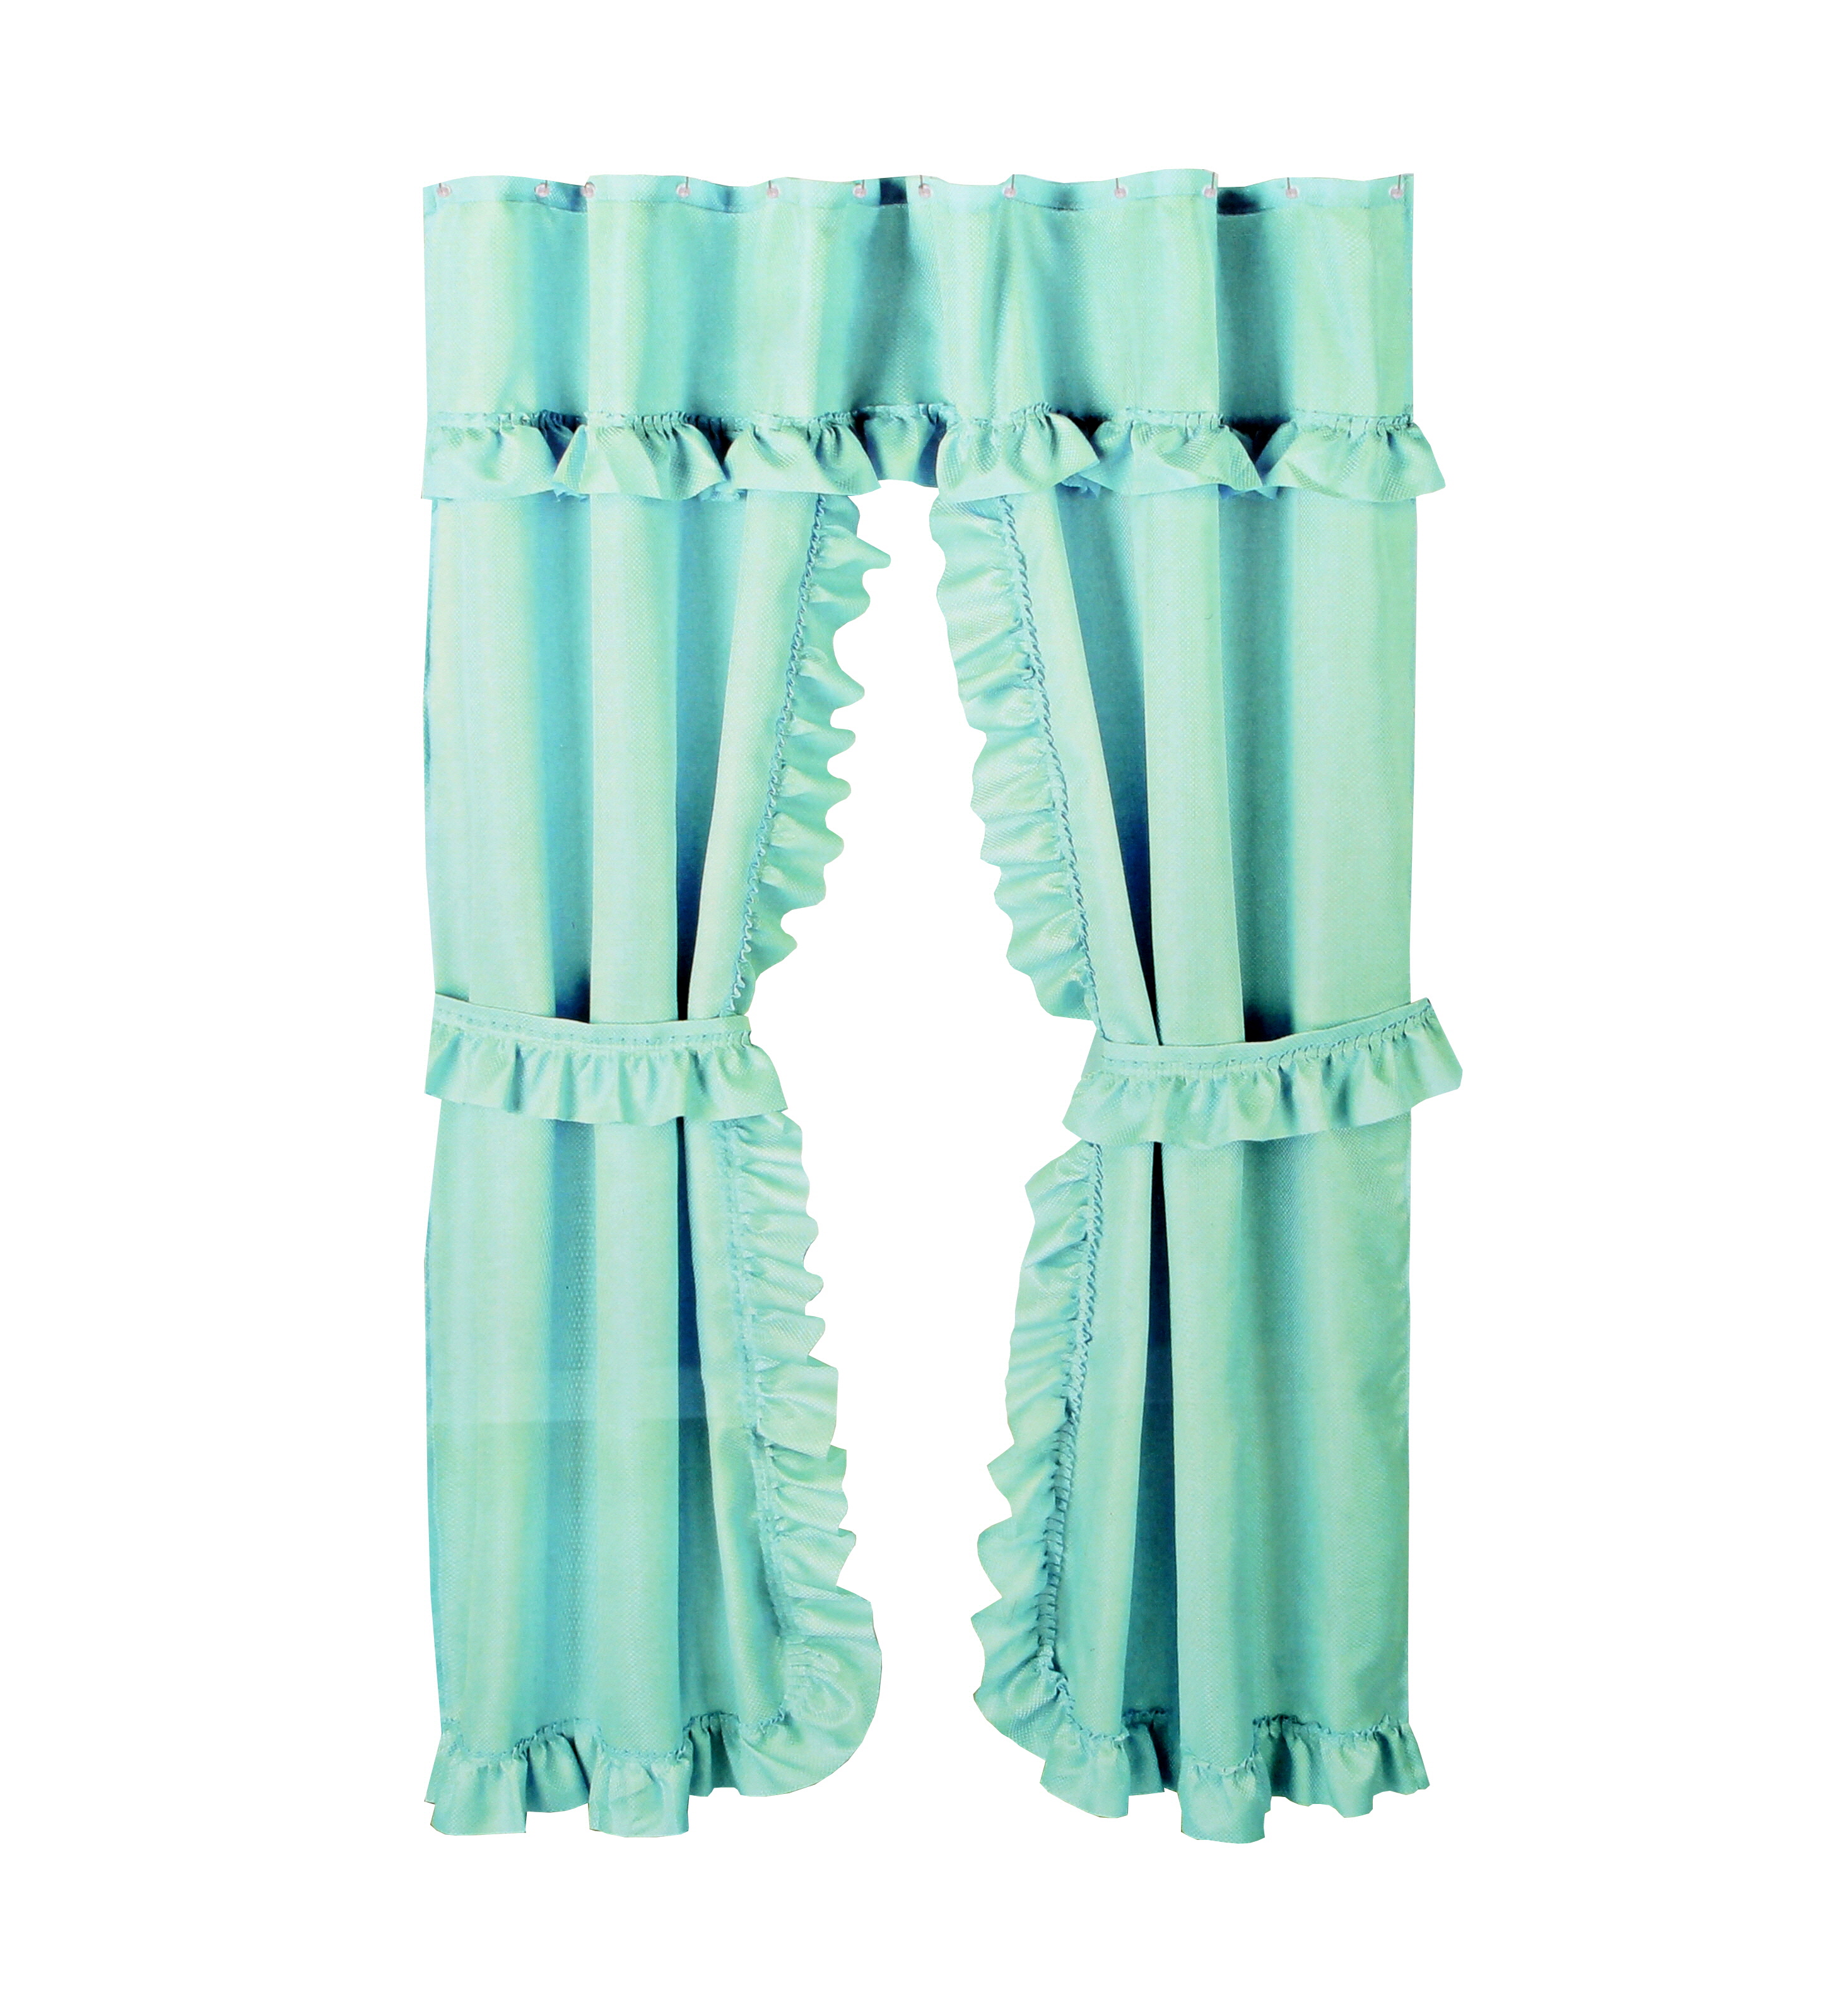 Better Home Turquoise Ruffled Double Swag Shower Curtain & Liner 70" x 72" w/12 Roller Rings